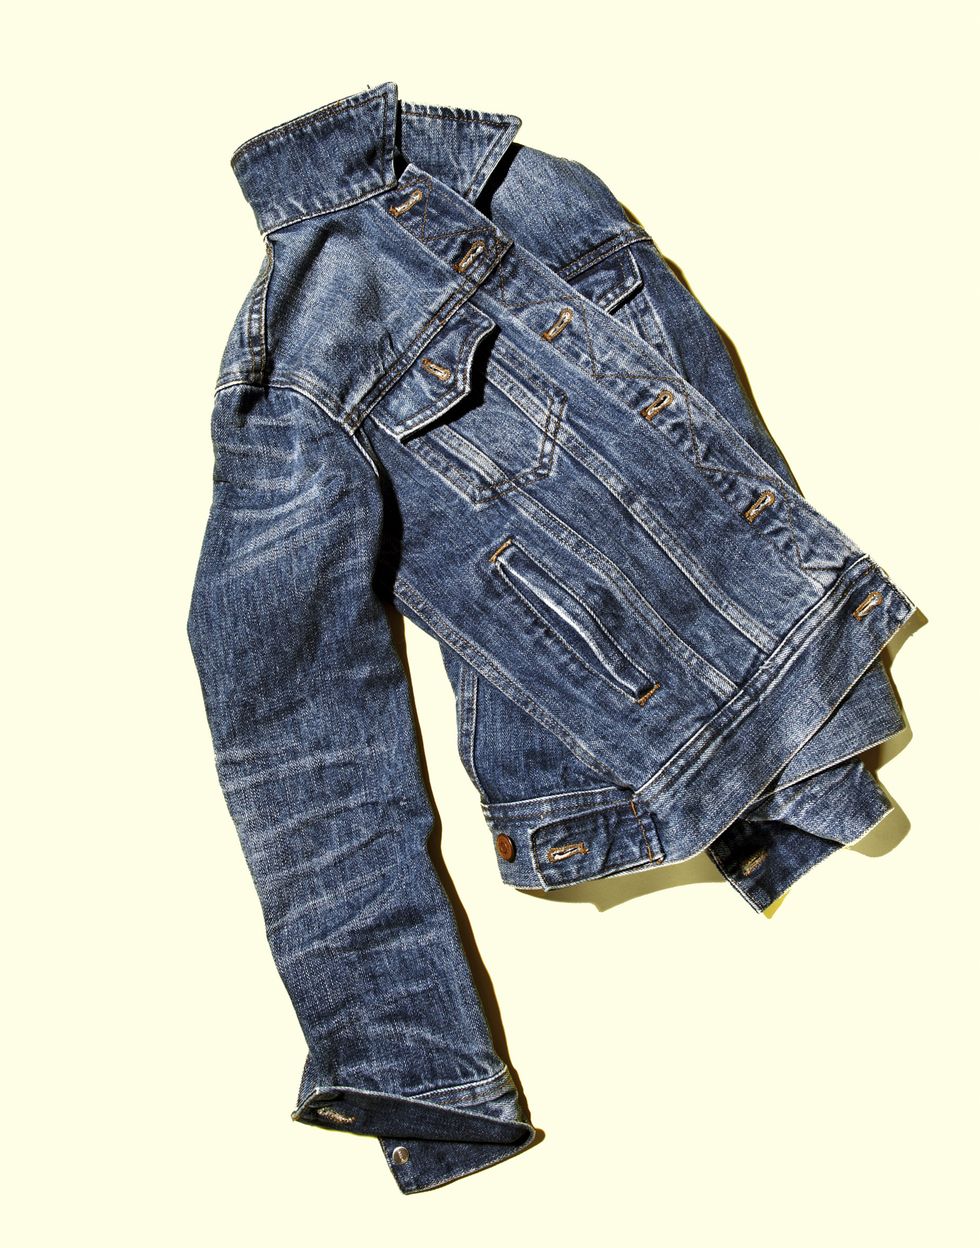 denim jacket laying artfully twisted on a white surface